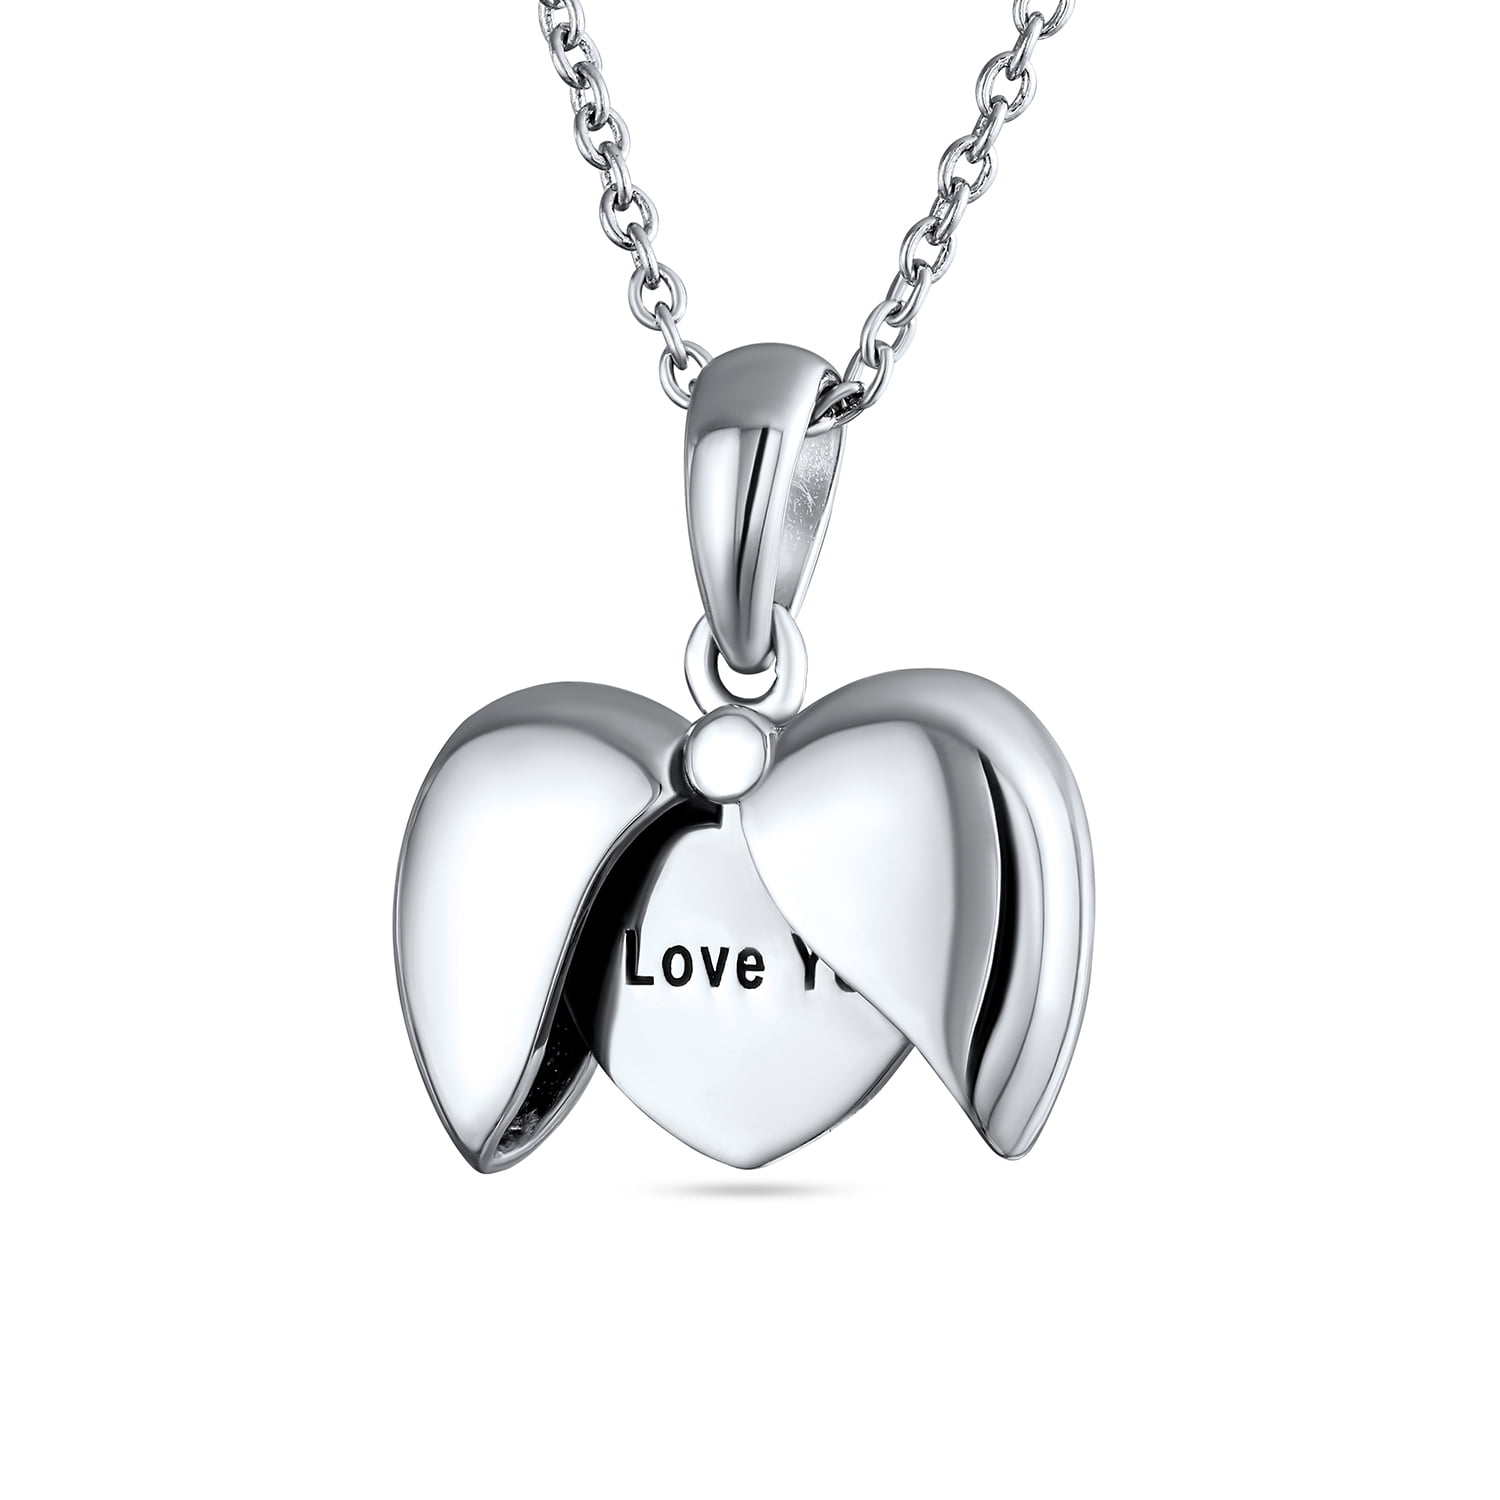 Engraved Pendant Necklace Love Heart Sterling Silver Quote I love you with all my heart Women 